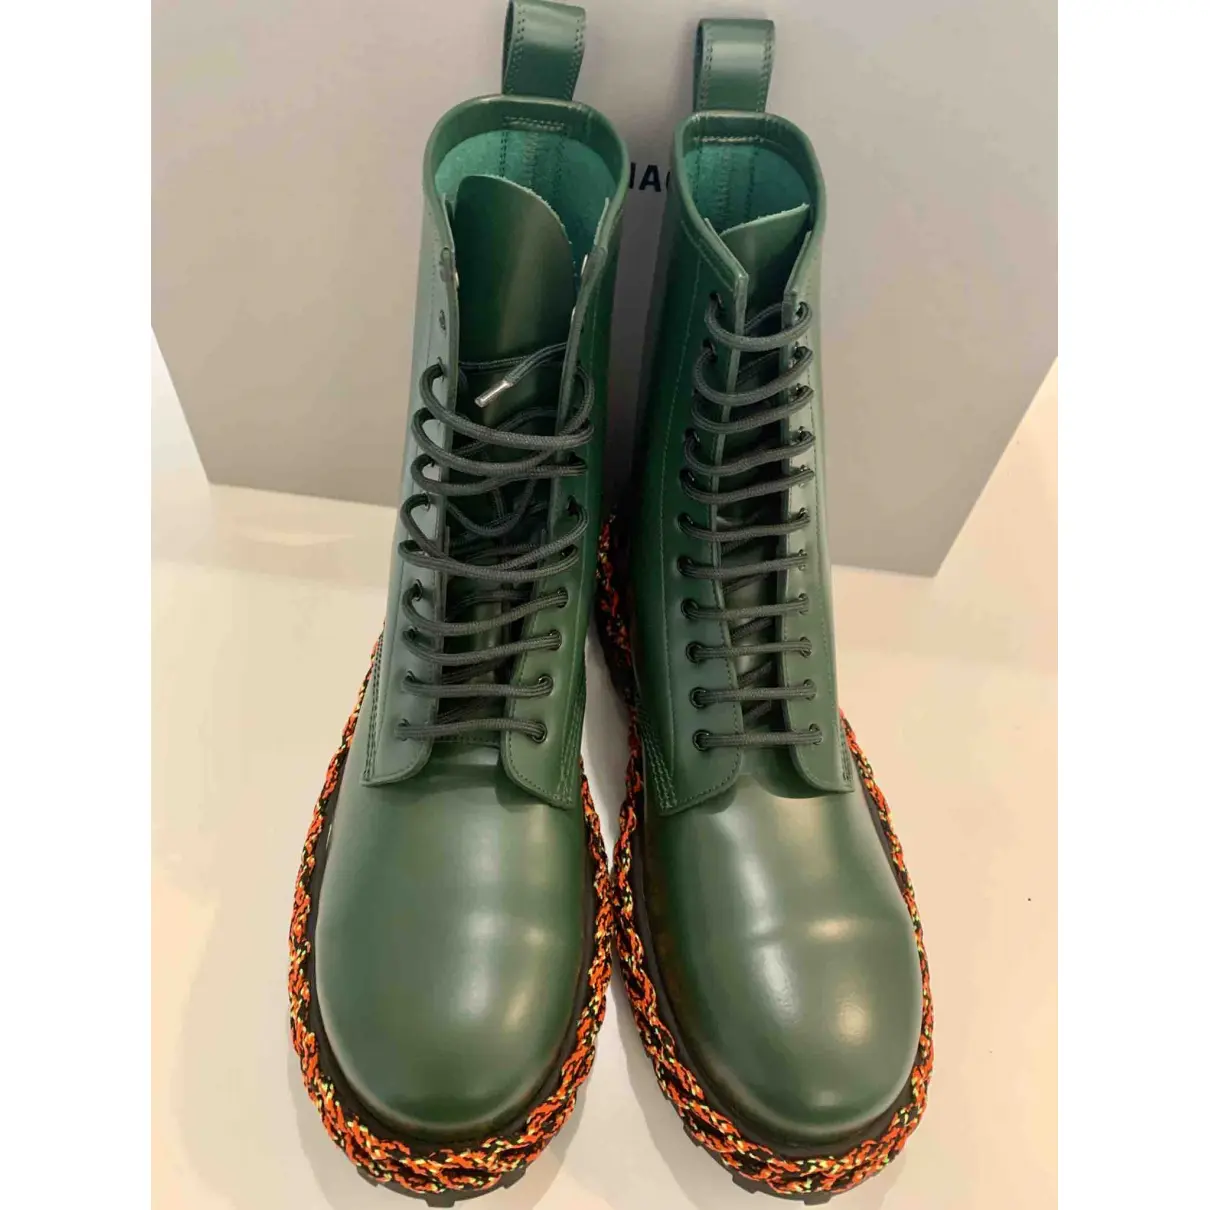 Buy Balenciaga Leather boots online